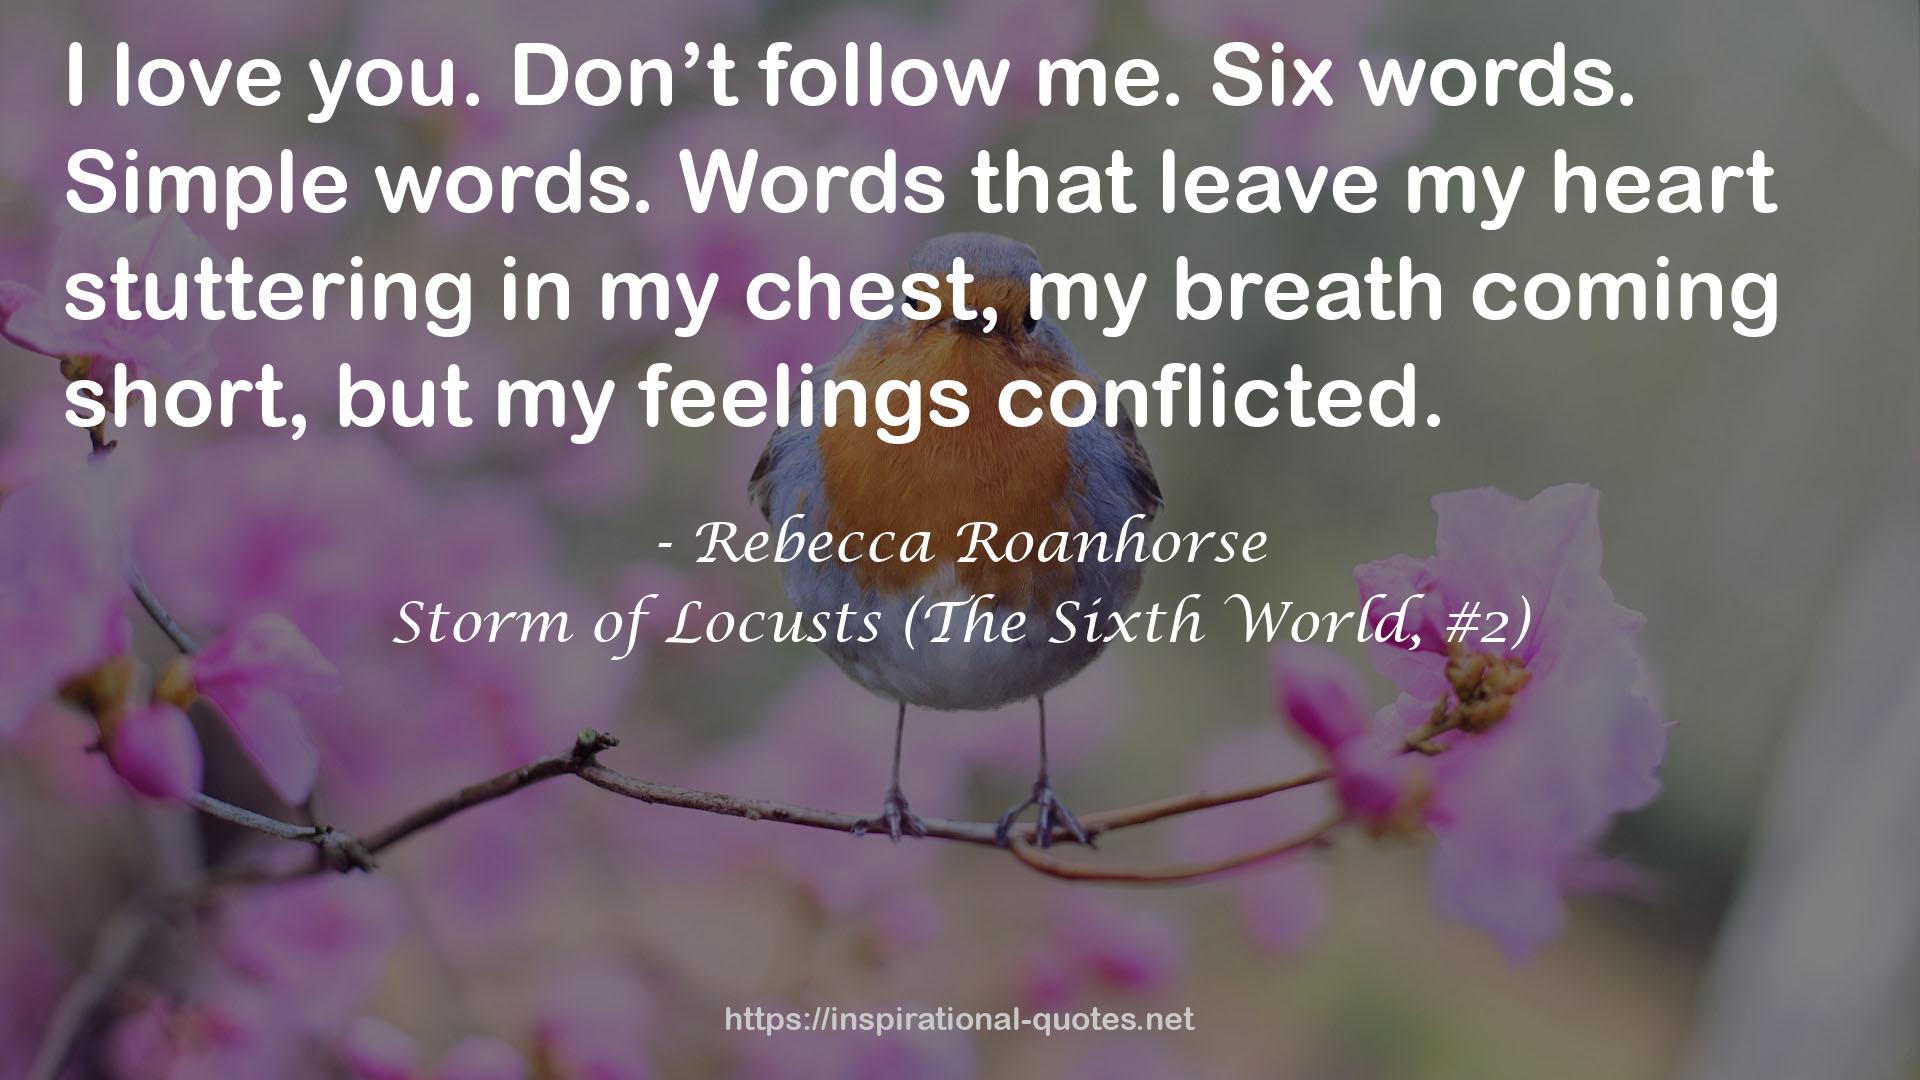 Storm of Locusts (The Sixth World, #2) QUOTES